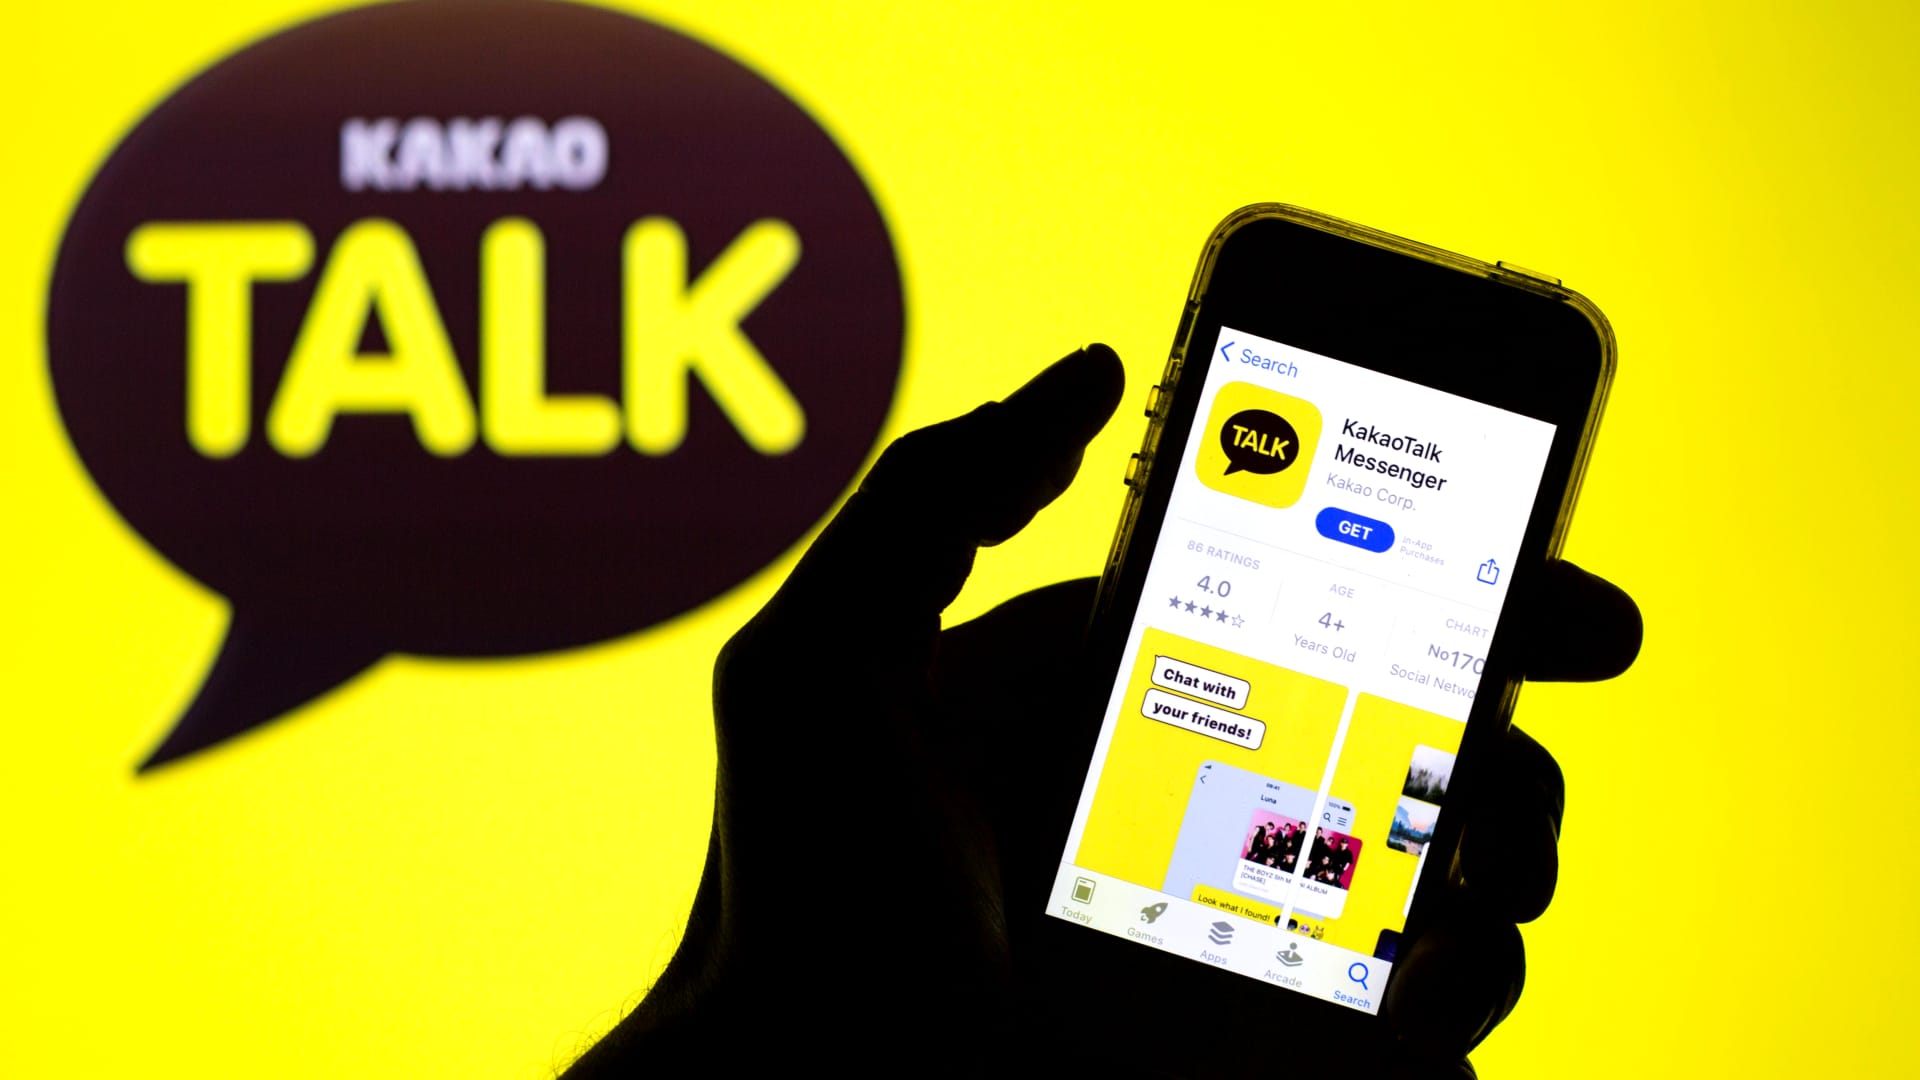 South Korea's Kakao plunges after outage, calls for monopoly probe